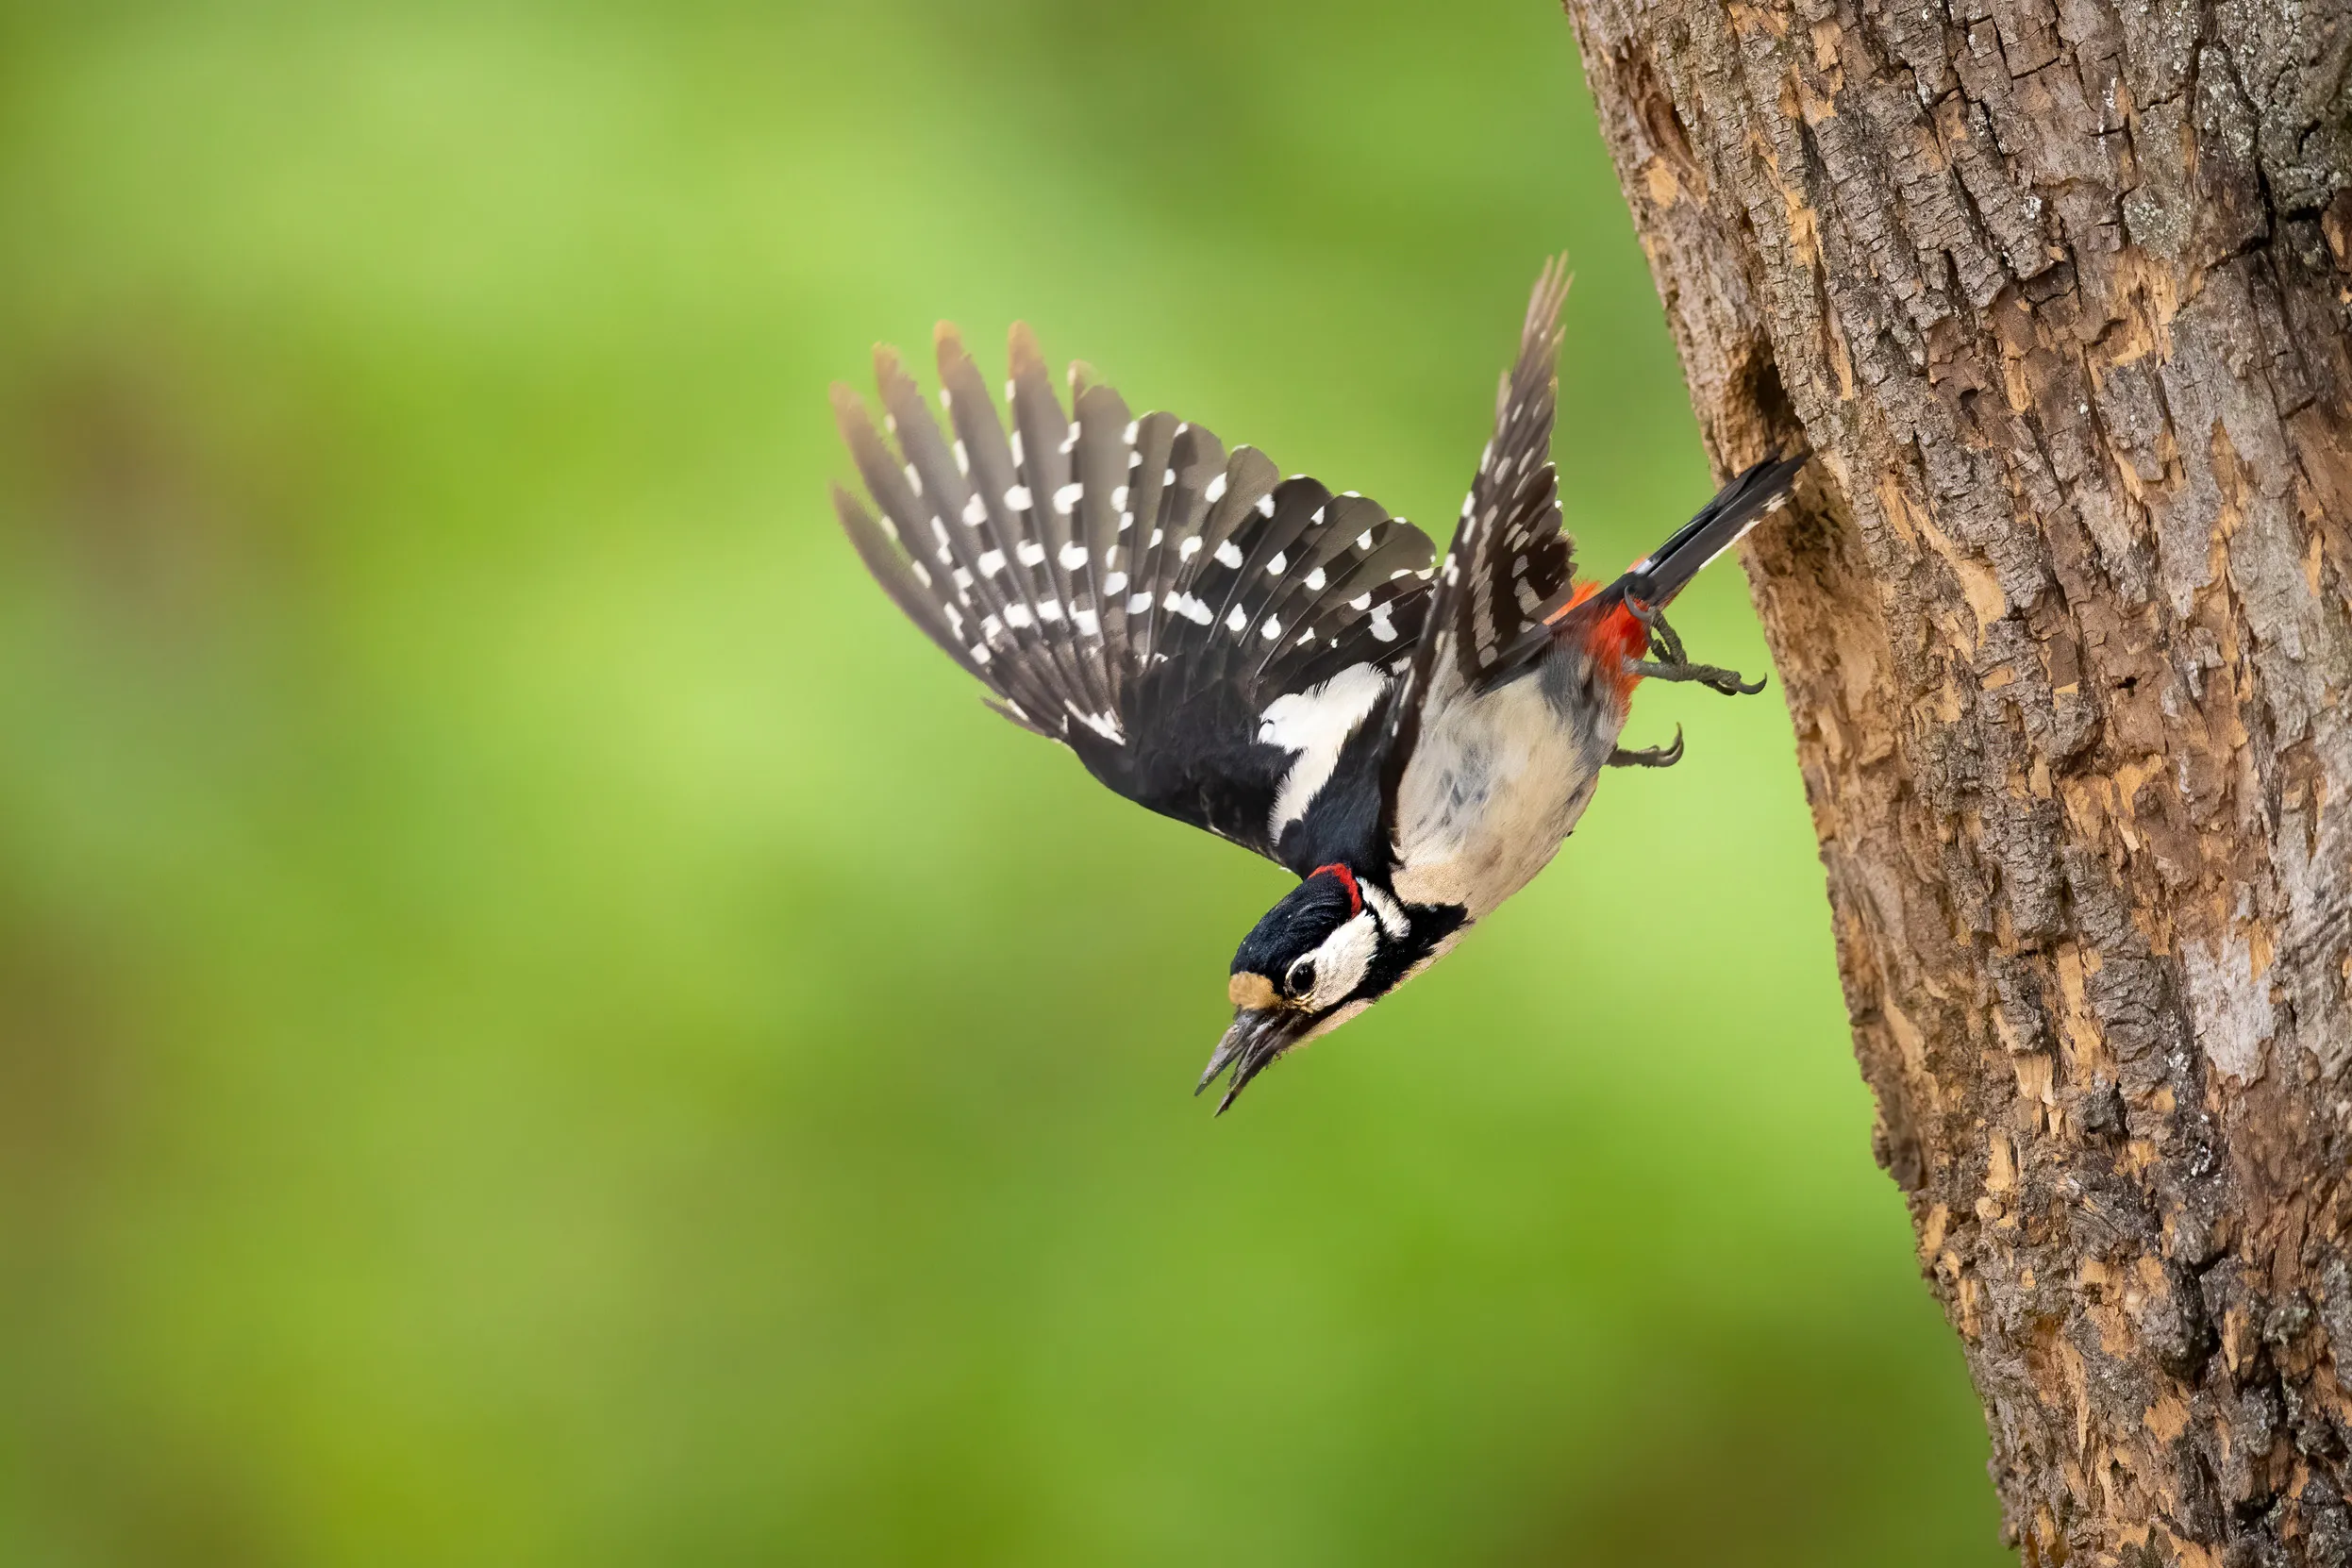 A Great Spotted Woodpecker diving out from their nest located in the side of a tree.